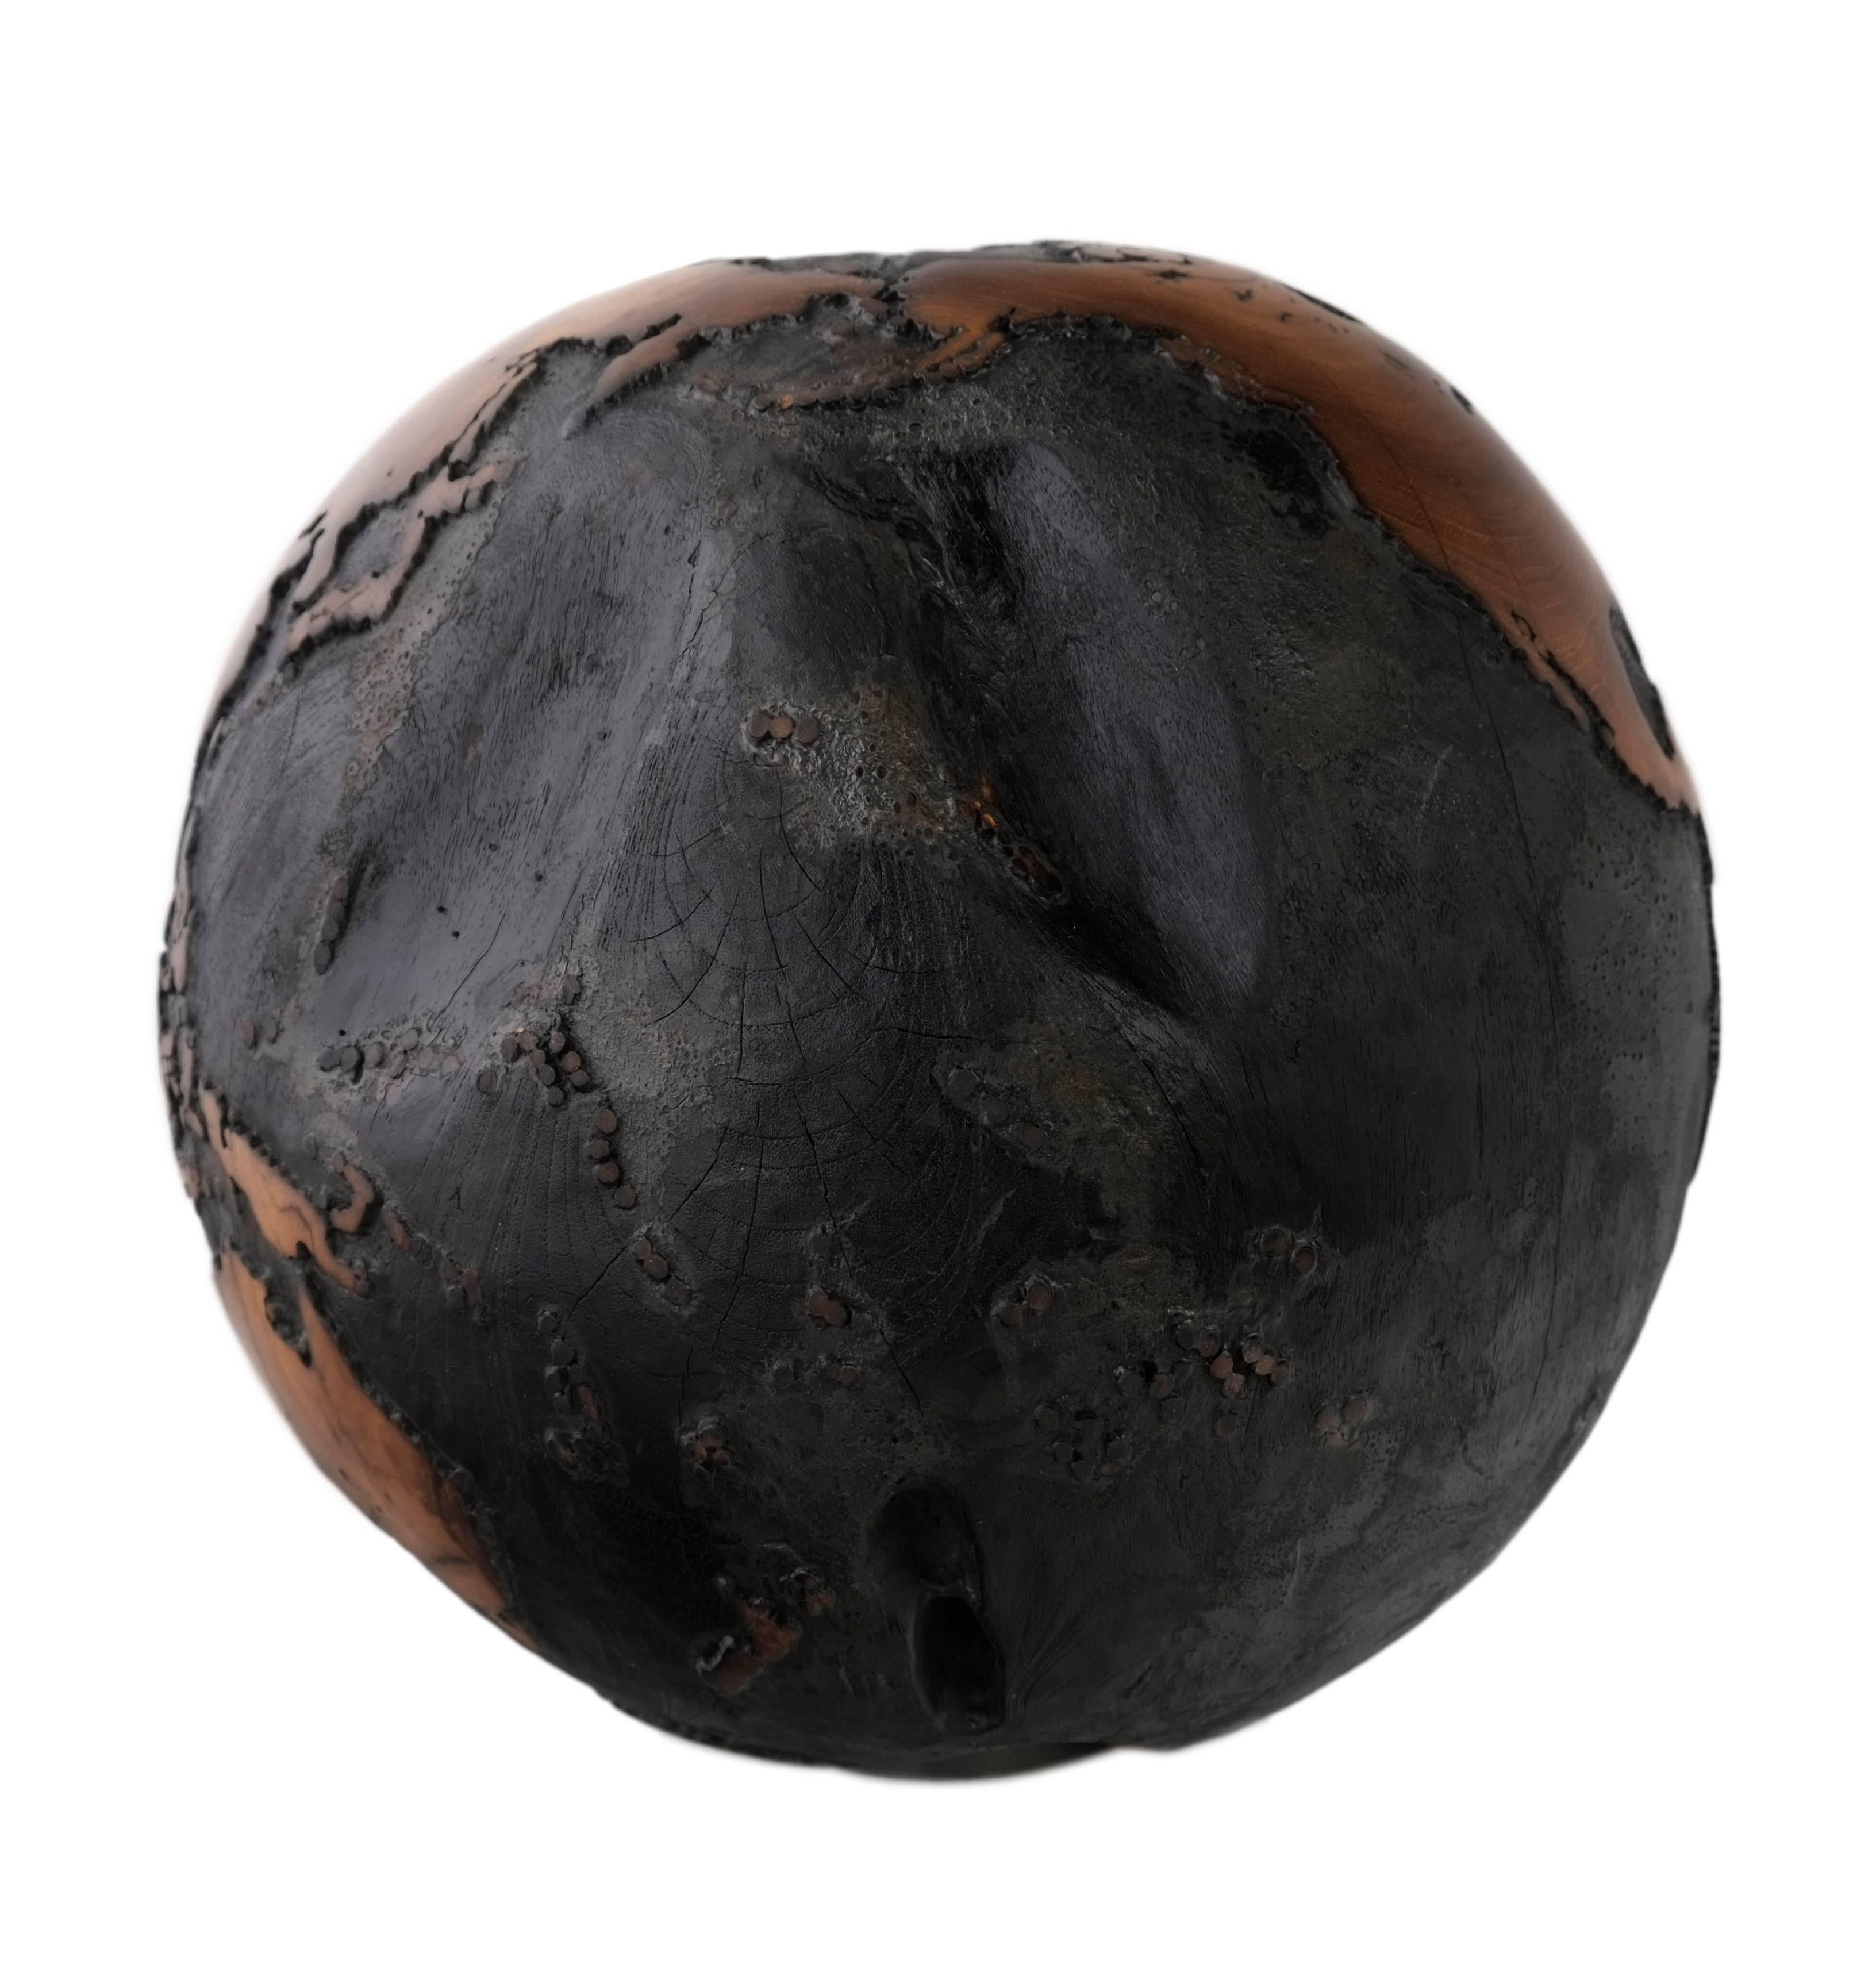 Balinese Contemporary Brulee, HB Globe Teak Root with Burnt Finishing 30cm, Saturday Sale